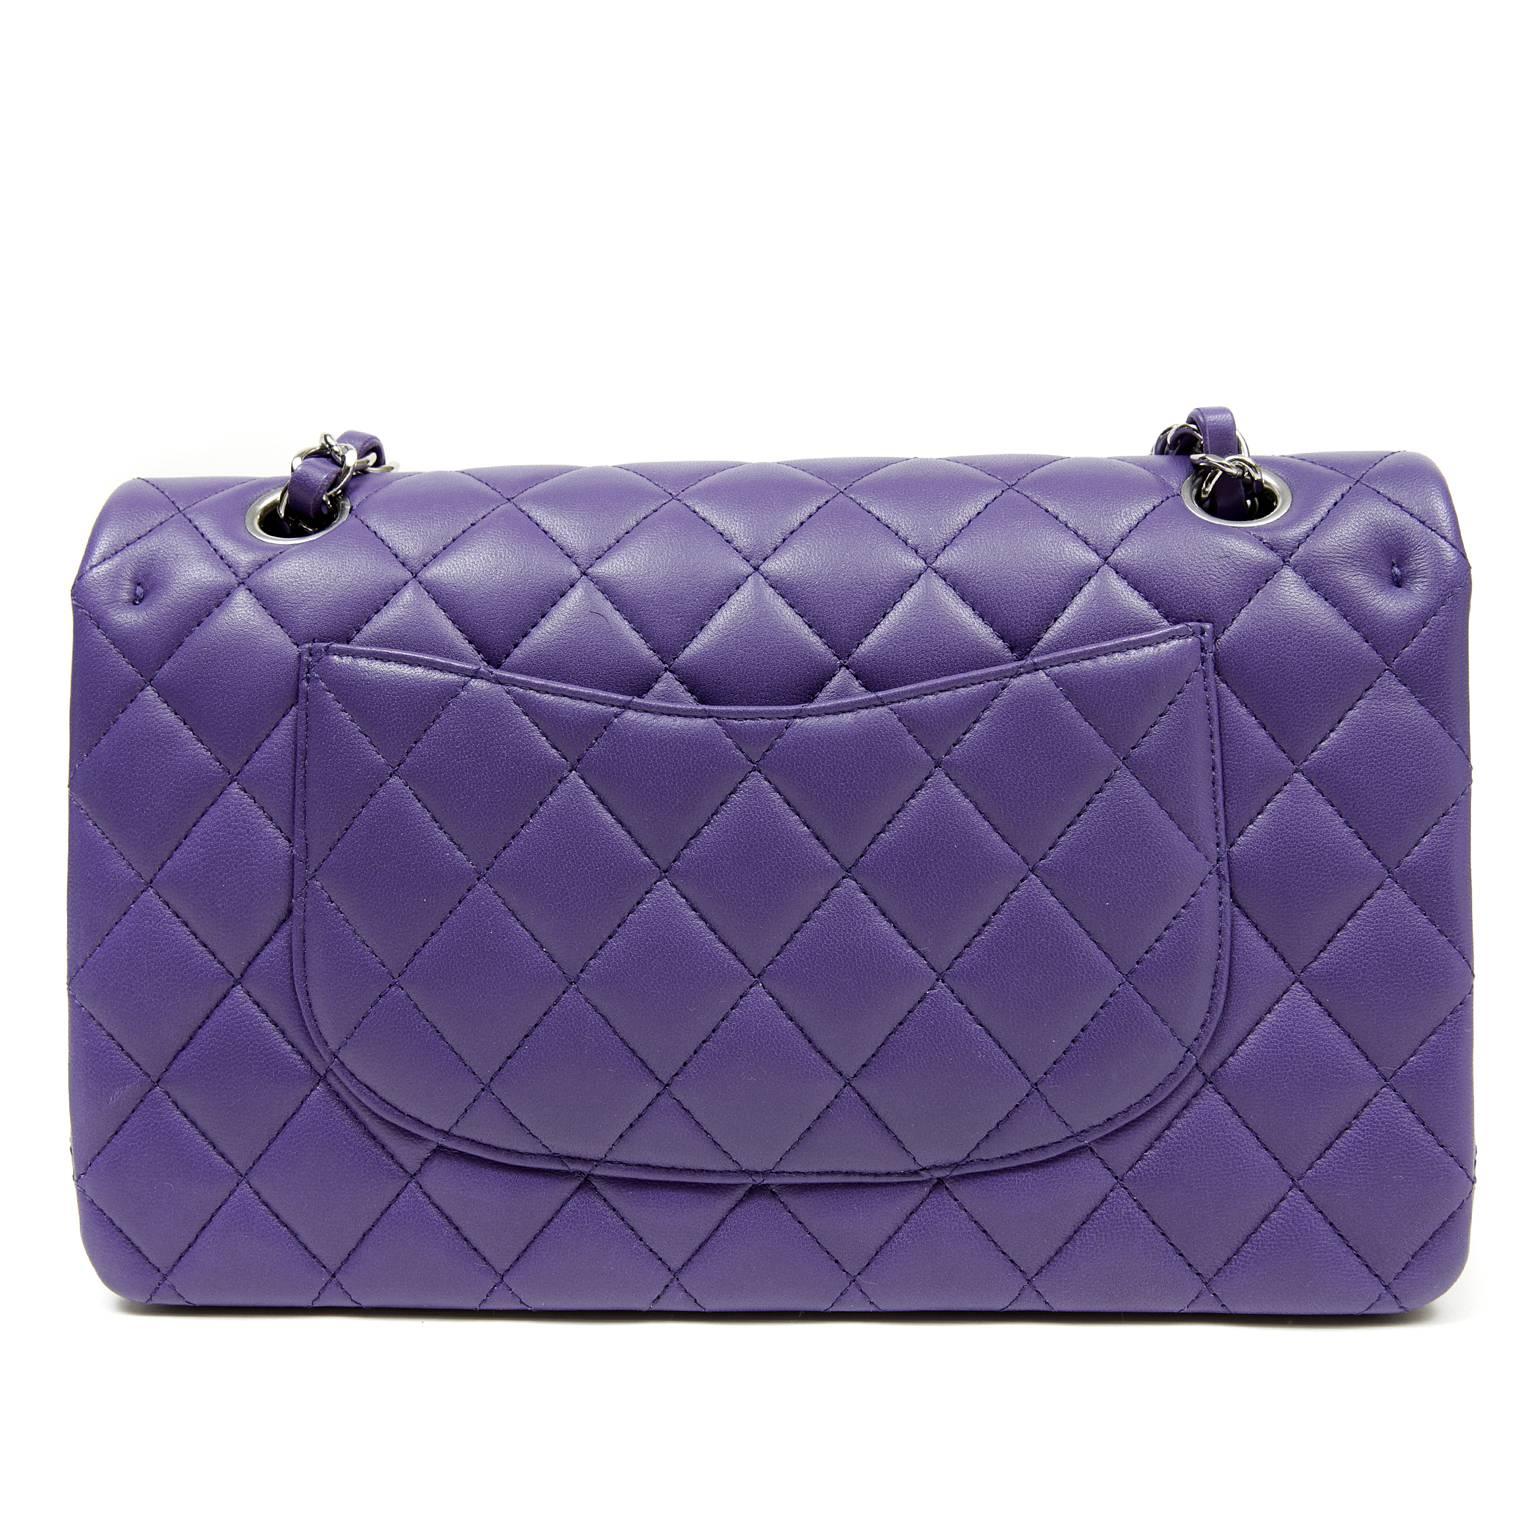 Chanel Purple Lambskin Classic Double Flap- PRISTINE, Never Carried
 The medium silhouette is extremely versatile and this stunning color is a must have for purple lovers.
Regal purple lambskin is quilted in signature Chanel diamond stitched